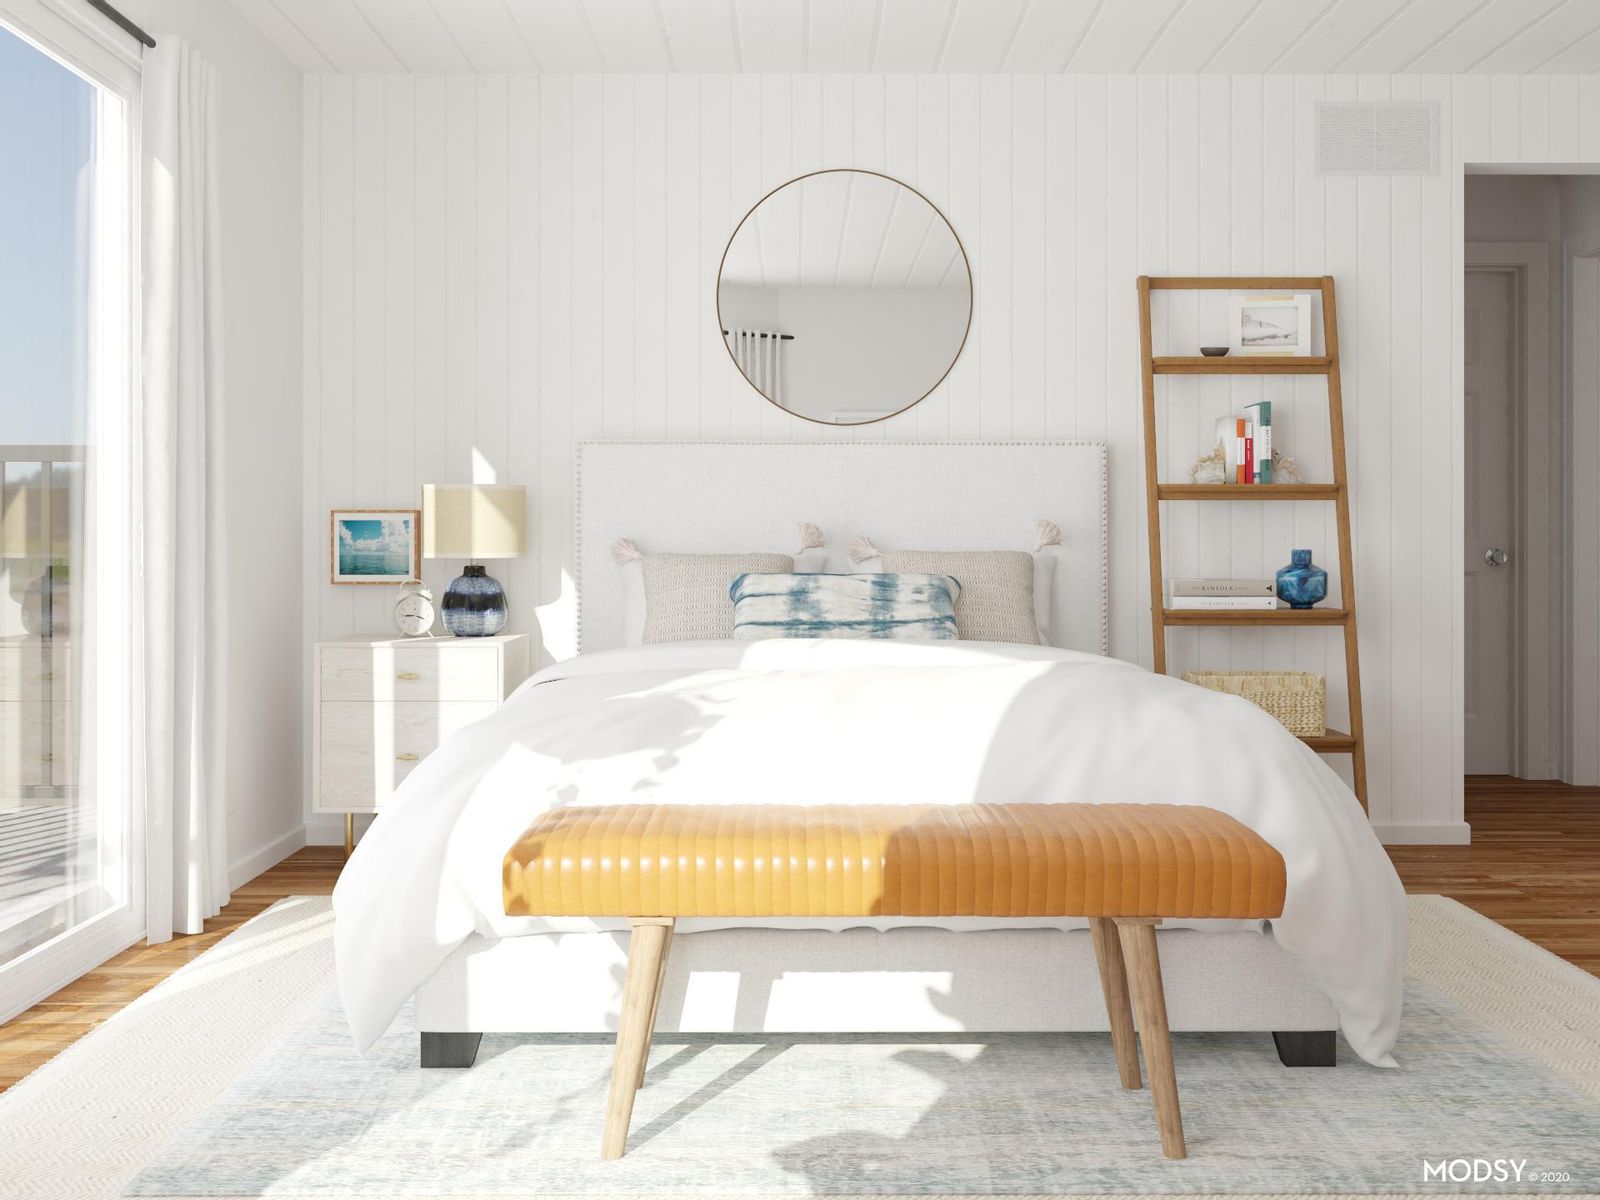 Create A Calm And Relaxing Bedroom